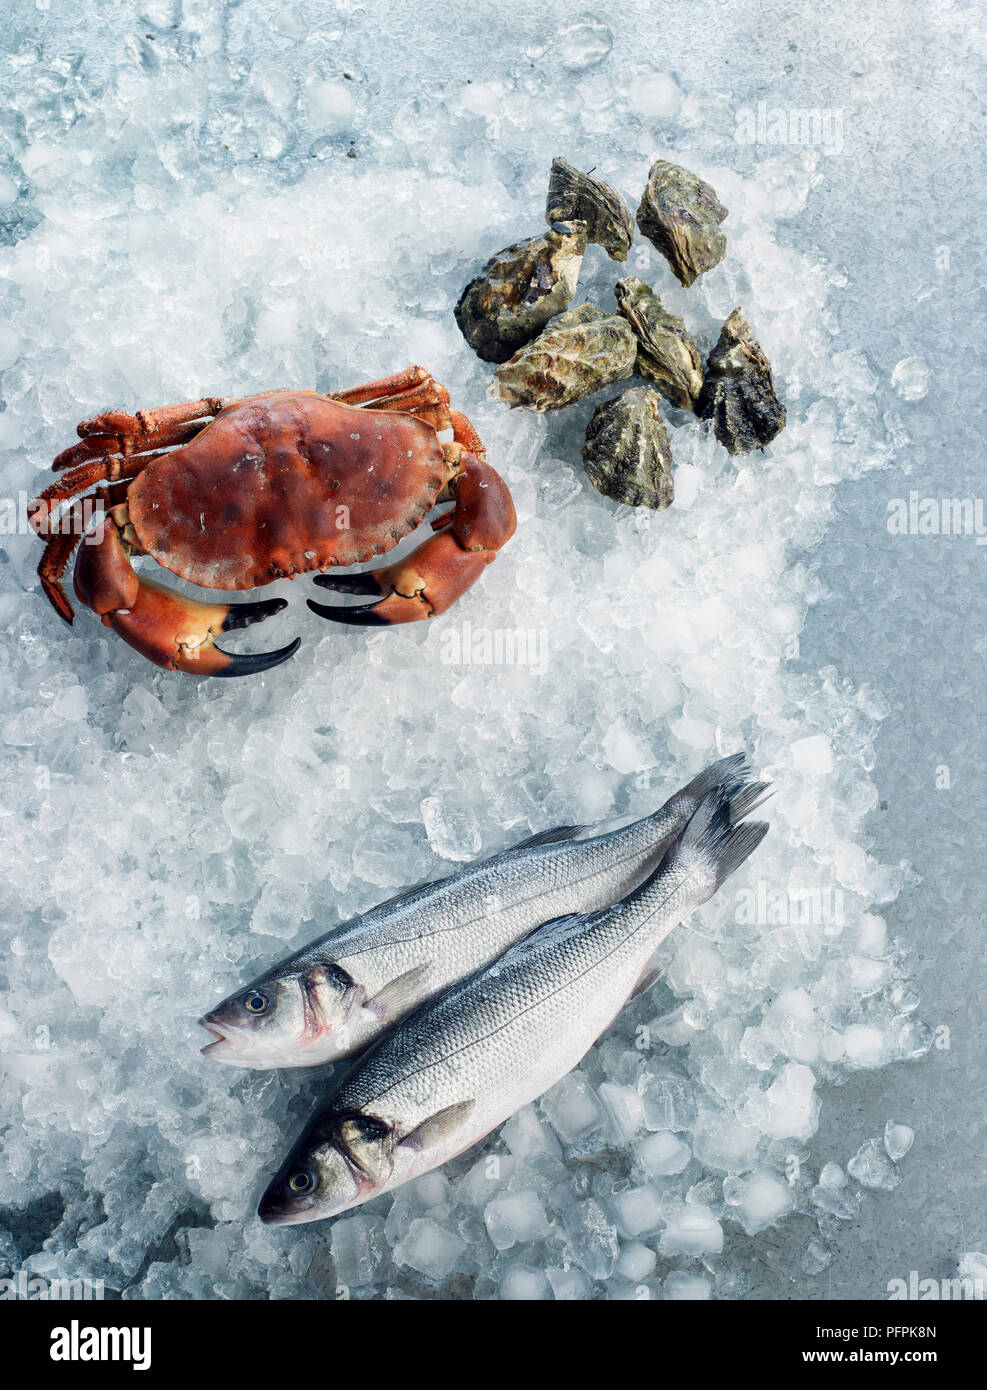 Brown crab, oysters and sea bass on crushed ice Stock Photo